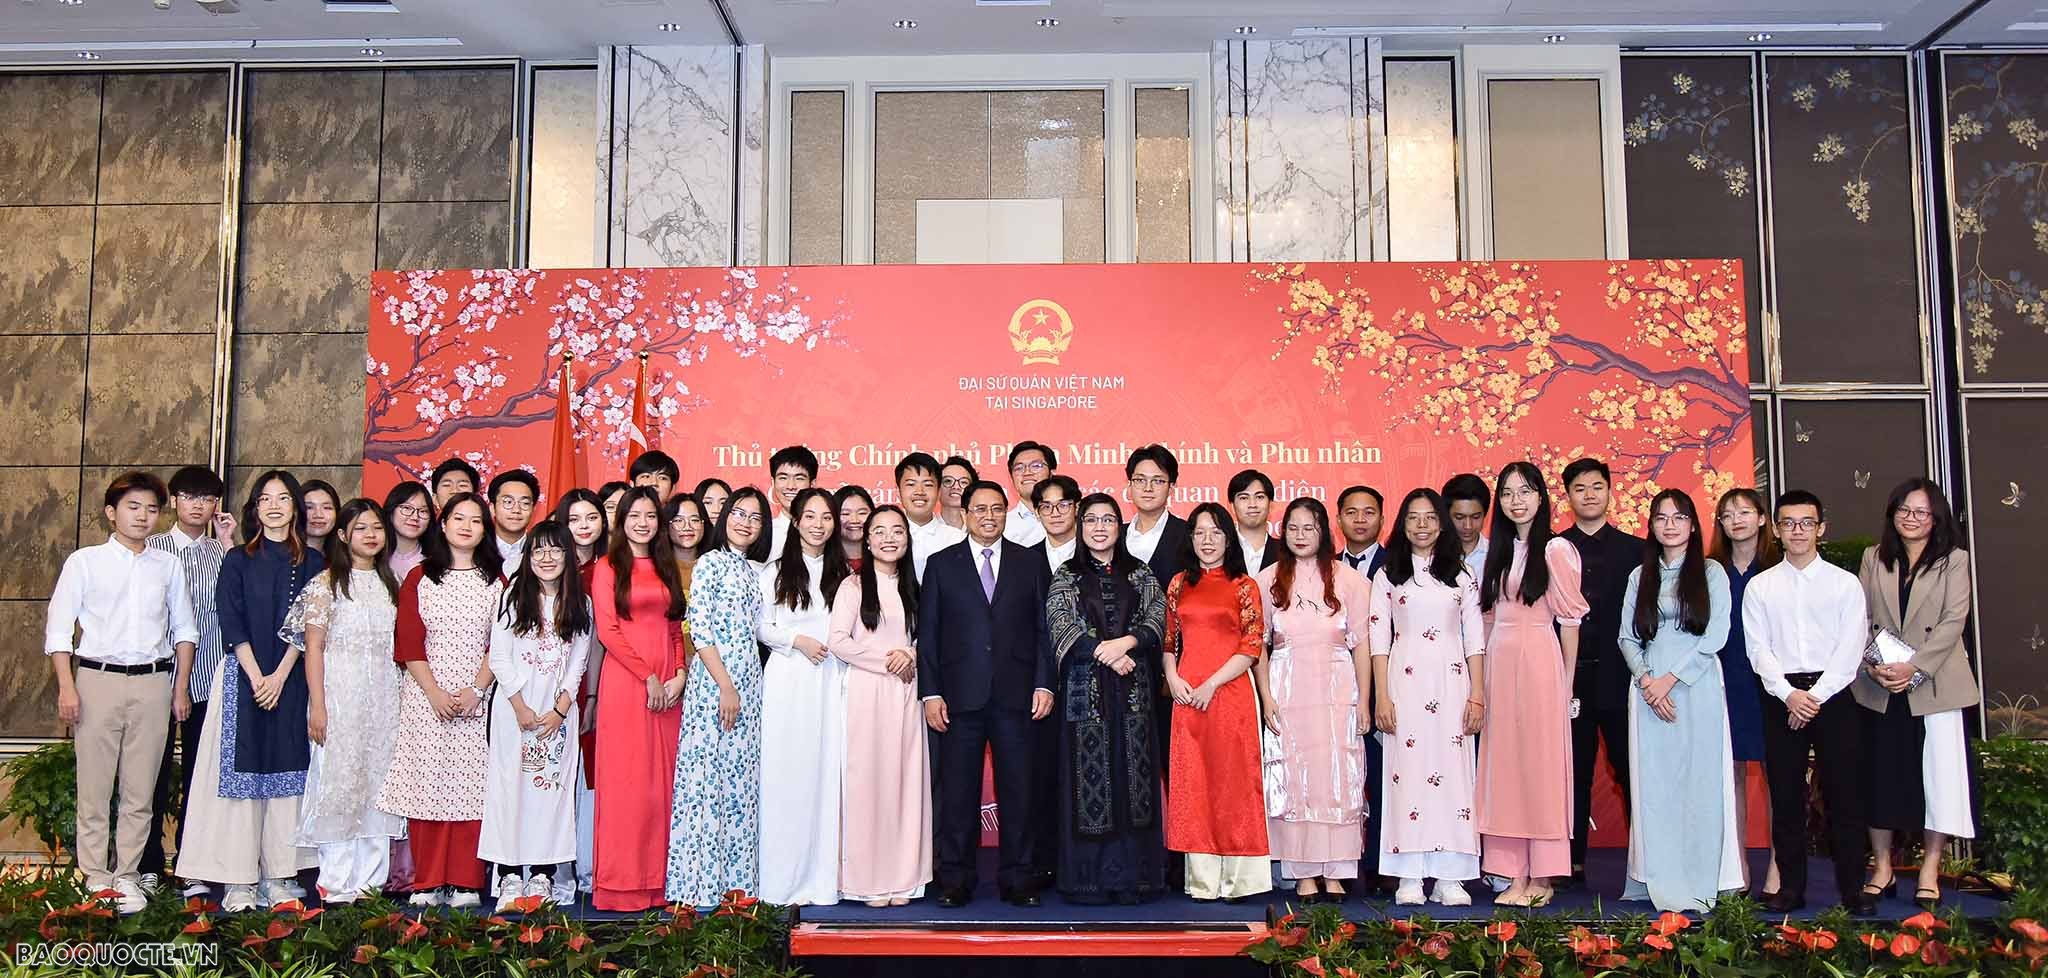 PM meets with representatives of Singapore Vietnamese community